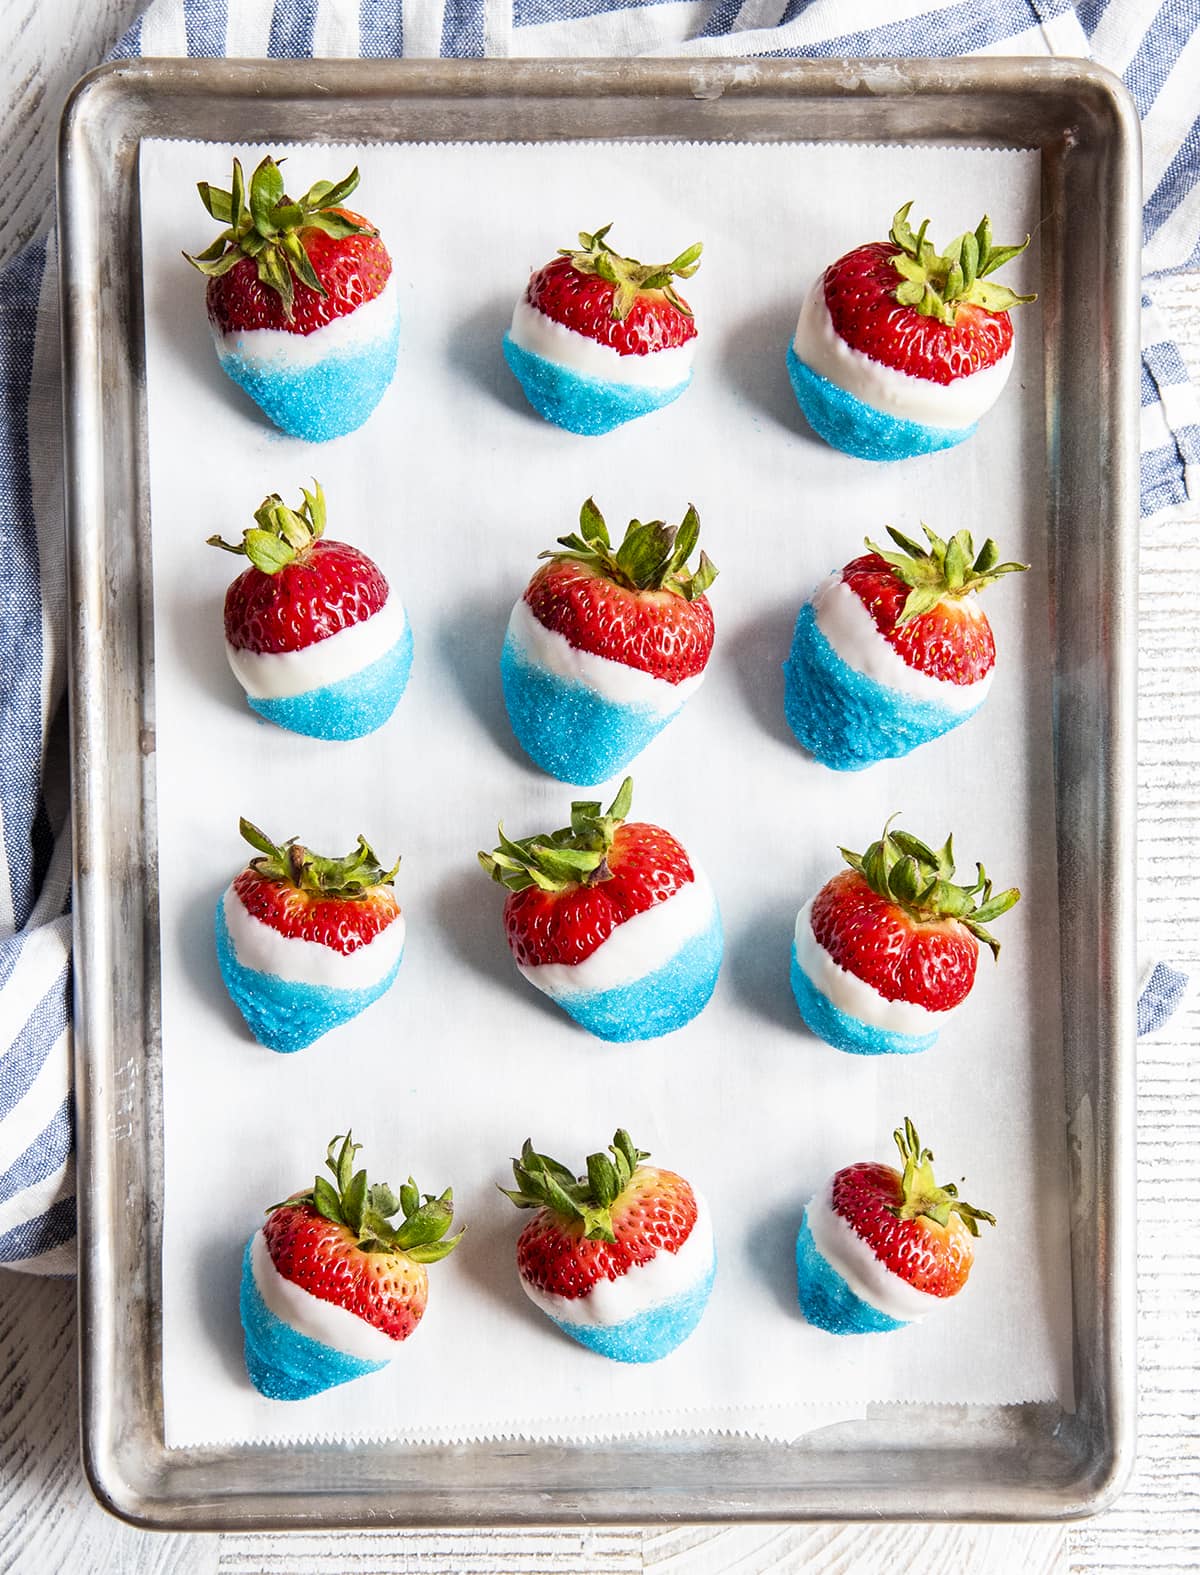 Rows of Fourth of July dipped strawberries on a baking sheet.